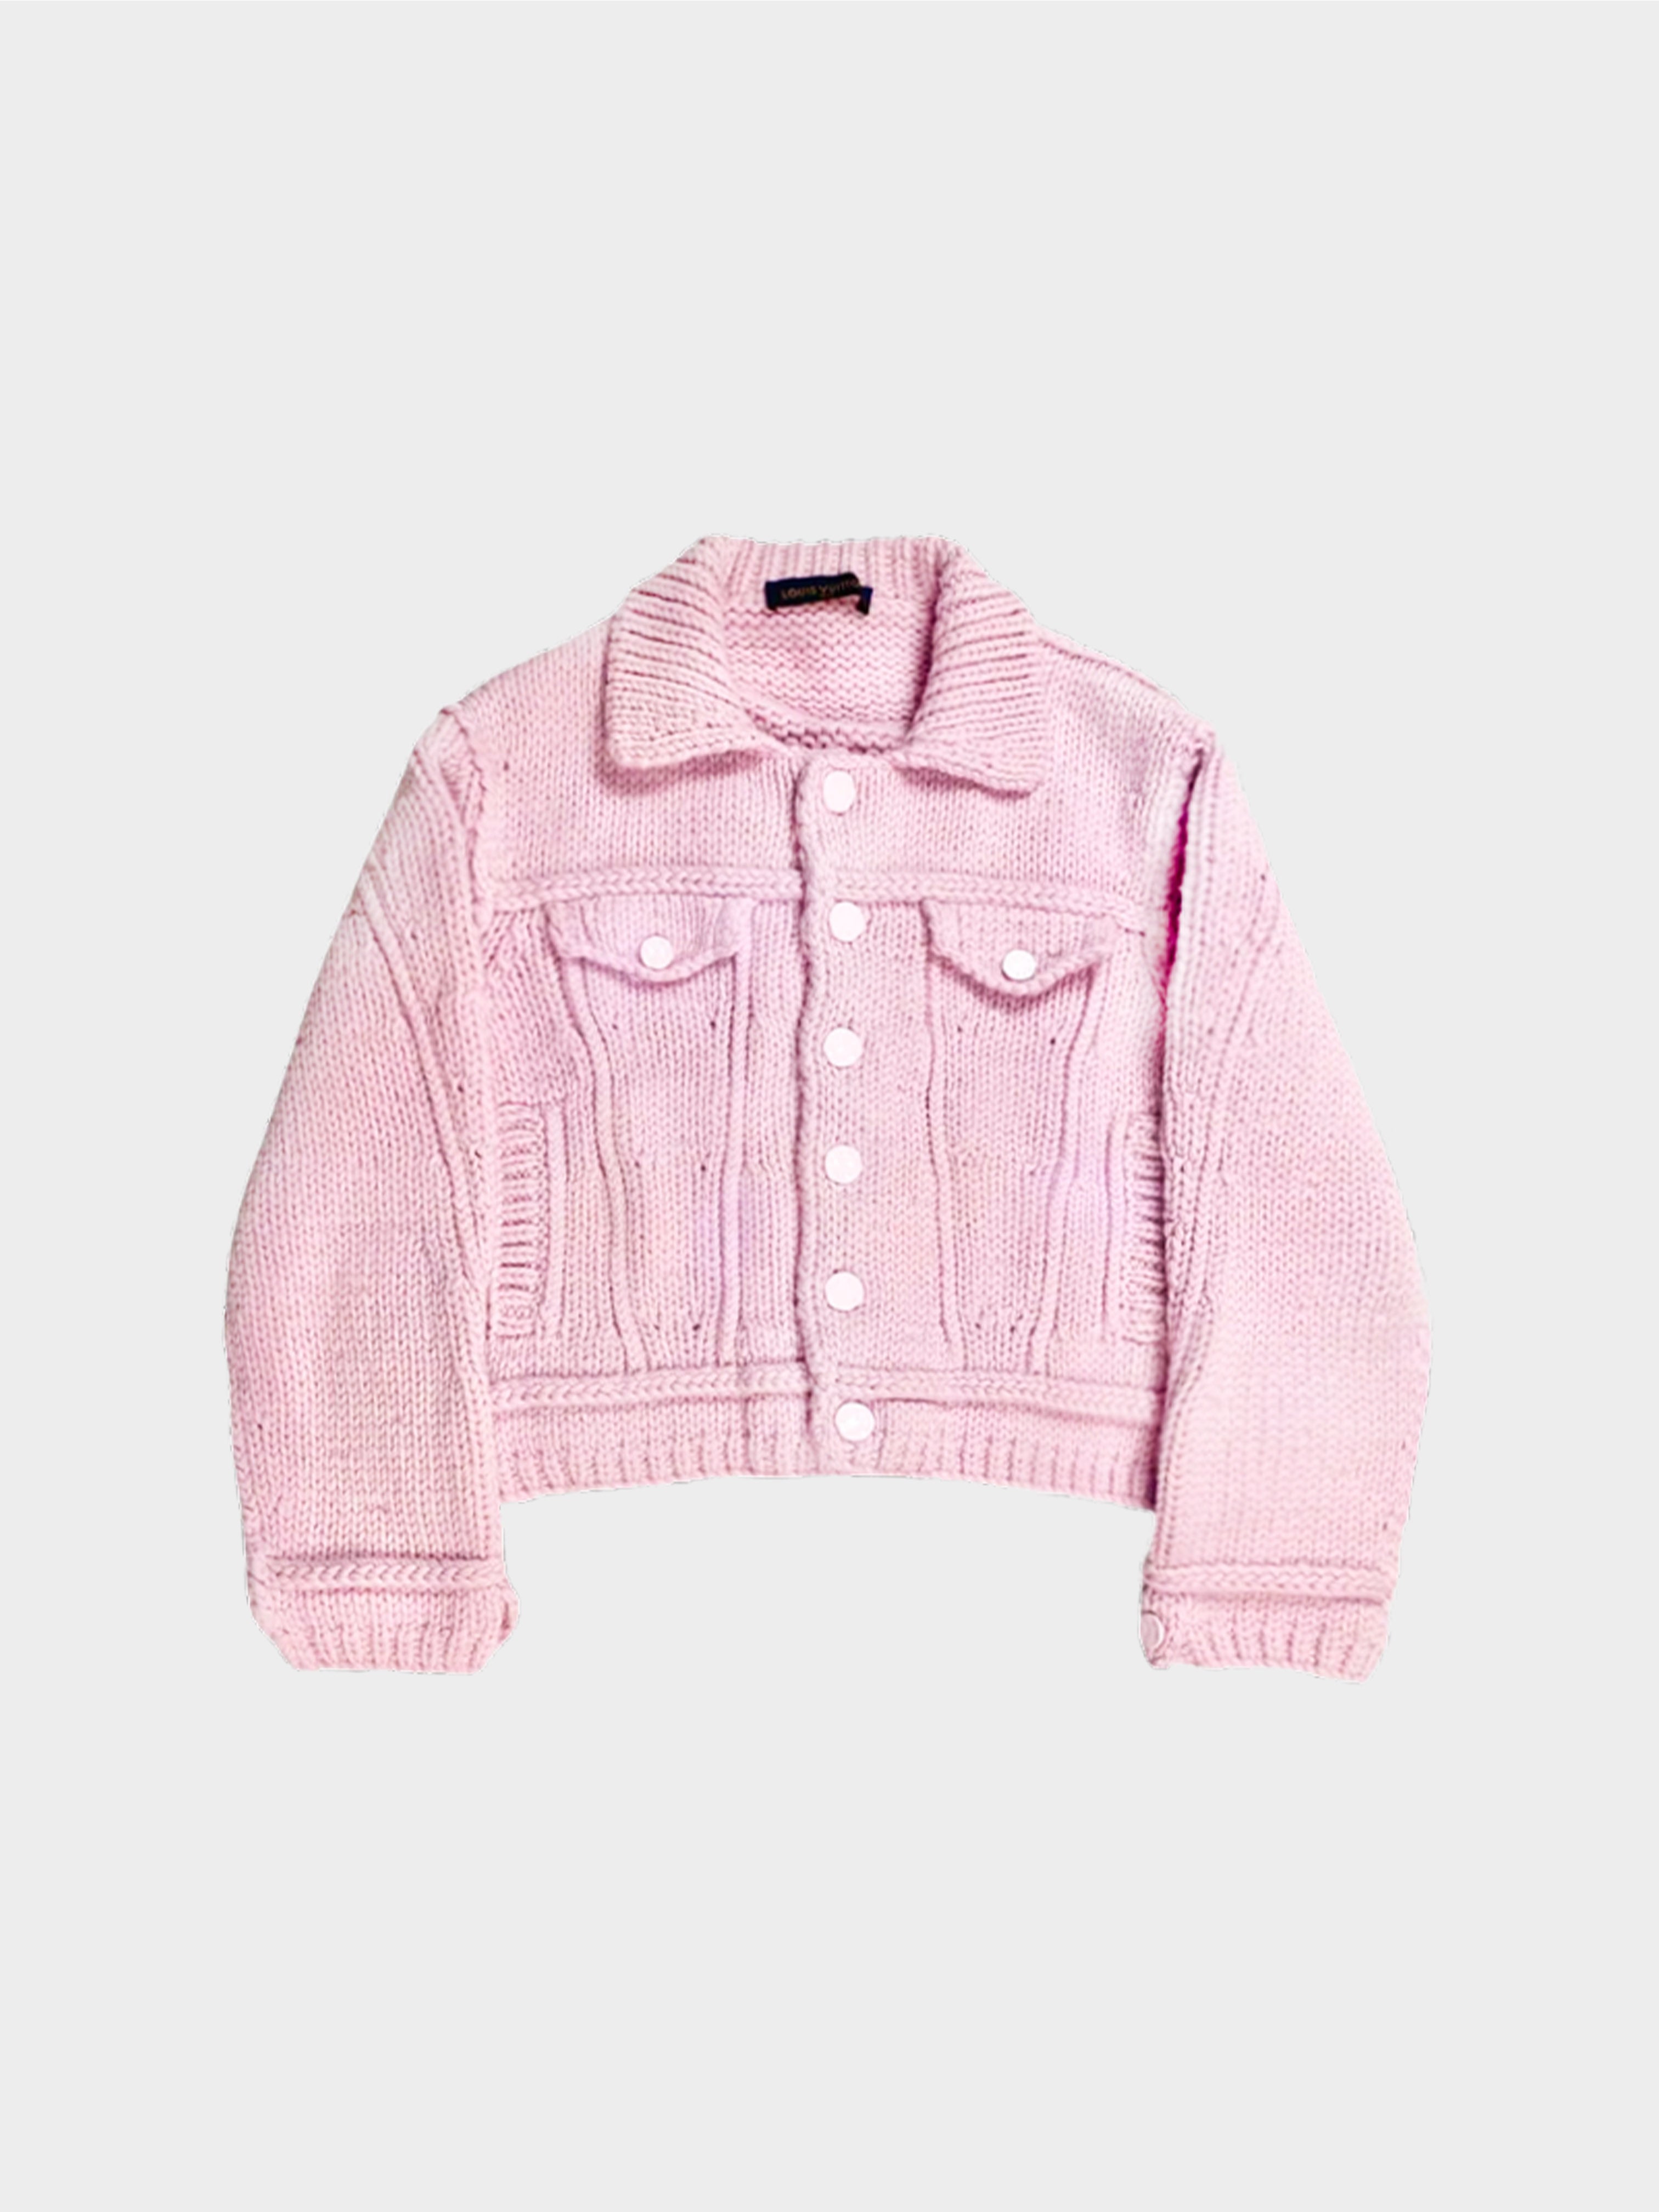 Louis Vuitton SS 2020 Rare Pink Asia Exclusive Knit Trucker Jacket · INTO